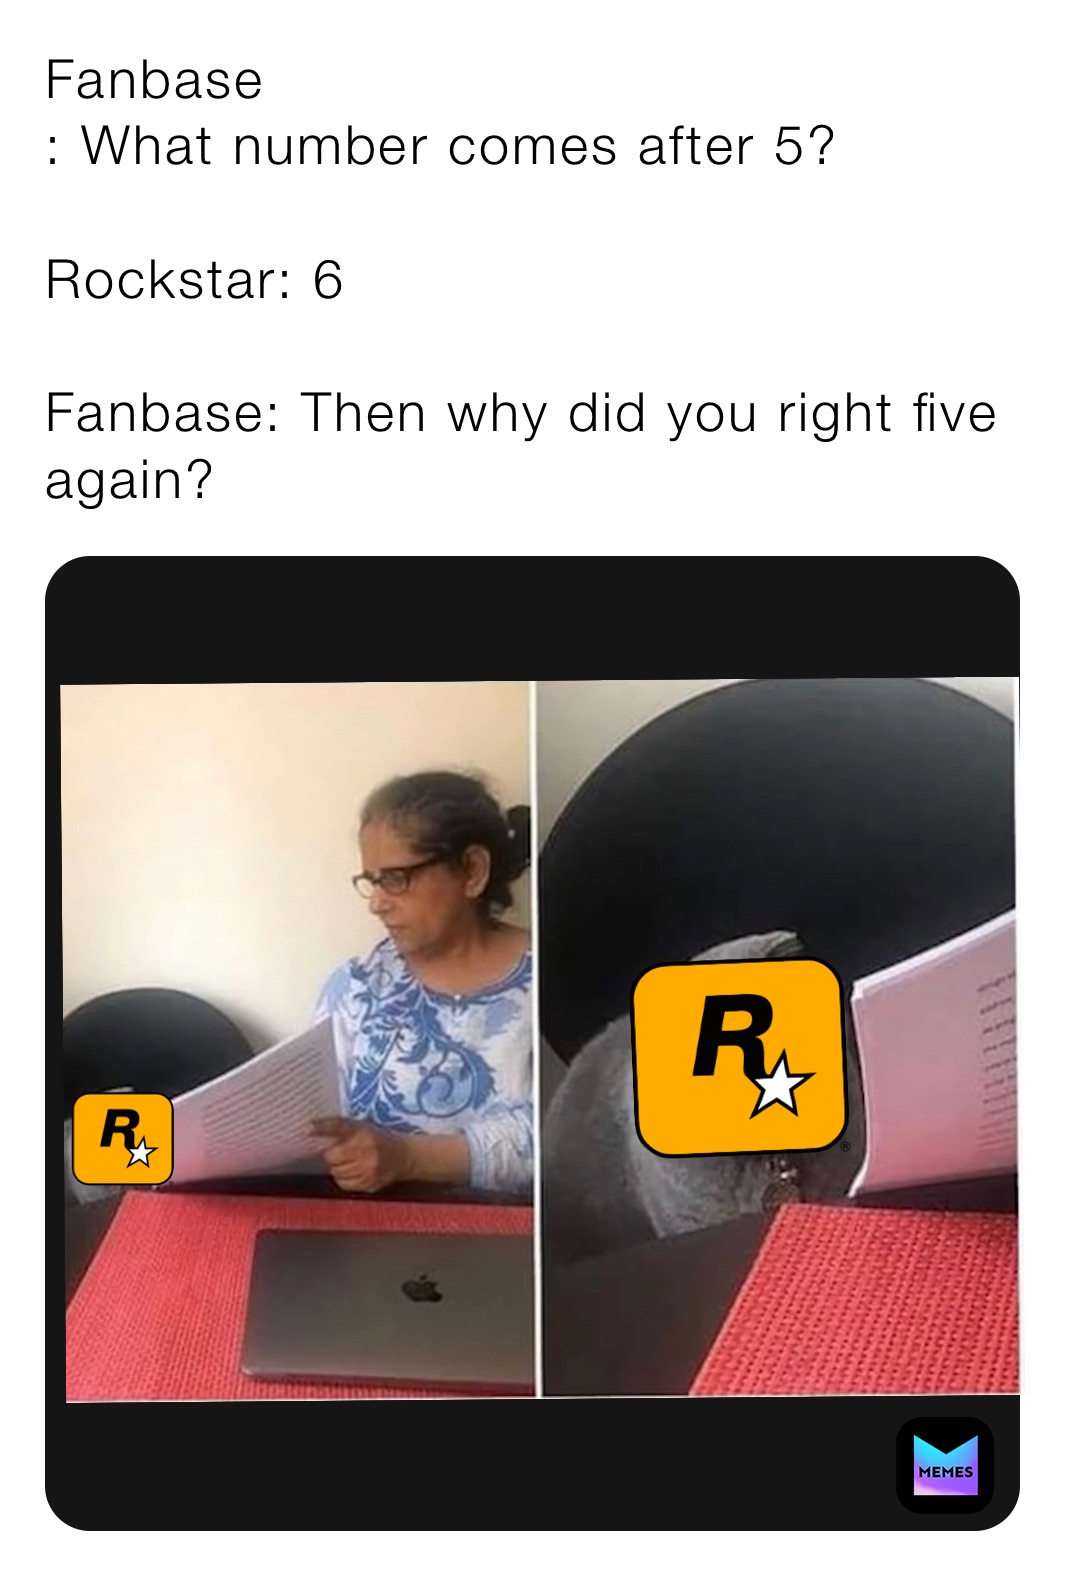 Fanbase
: What number comes after 5?

Rockstar: 6 

Fanbase: Then why did you right five again?